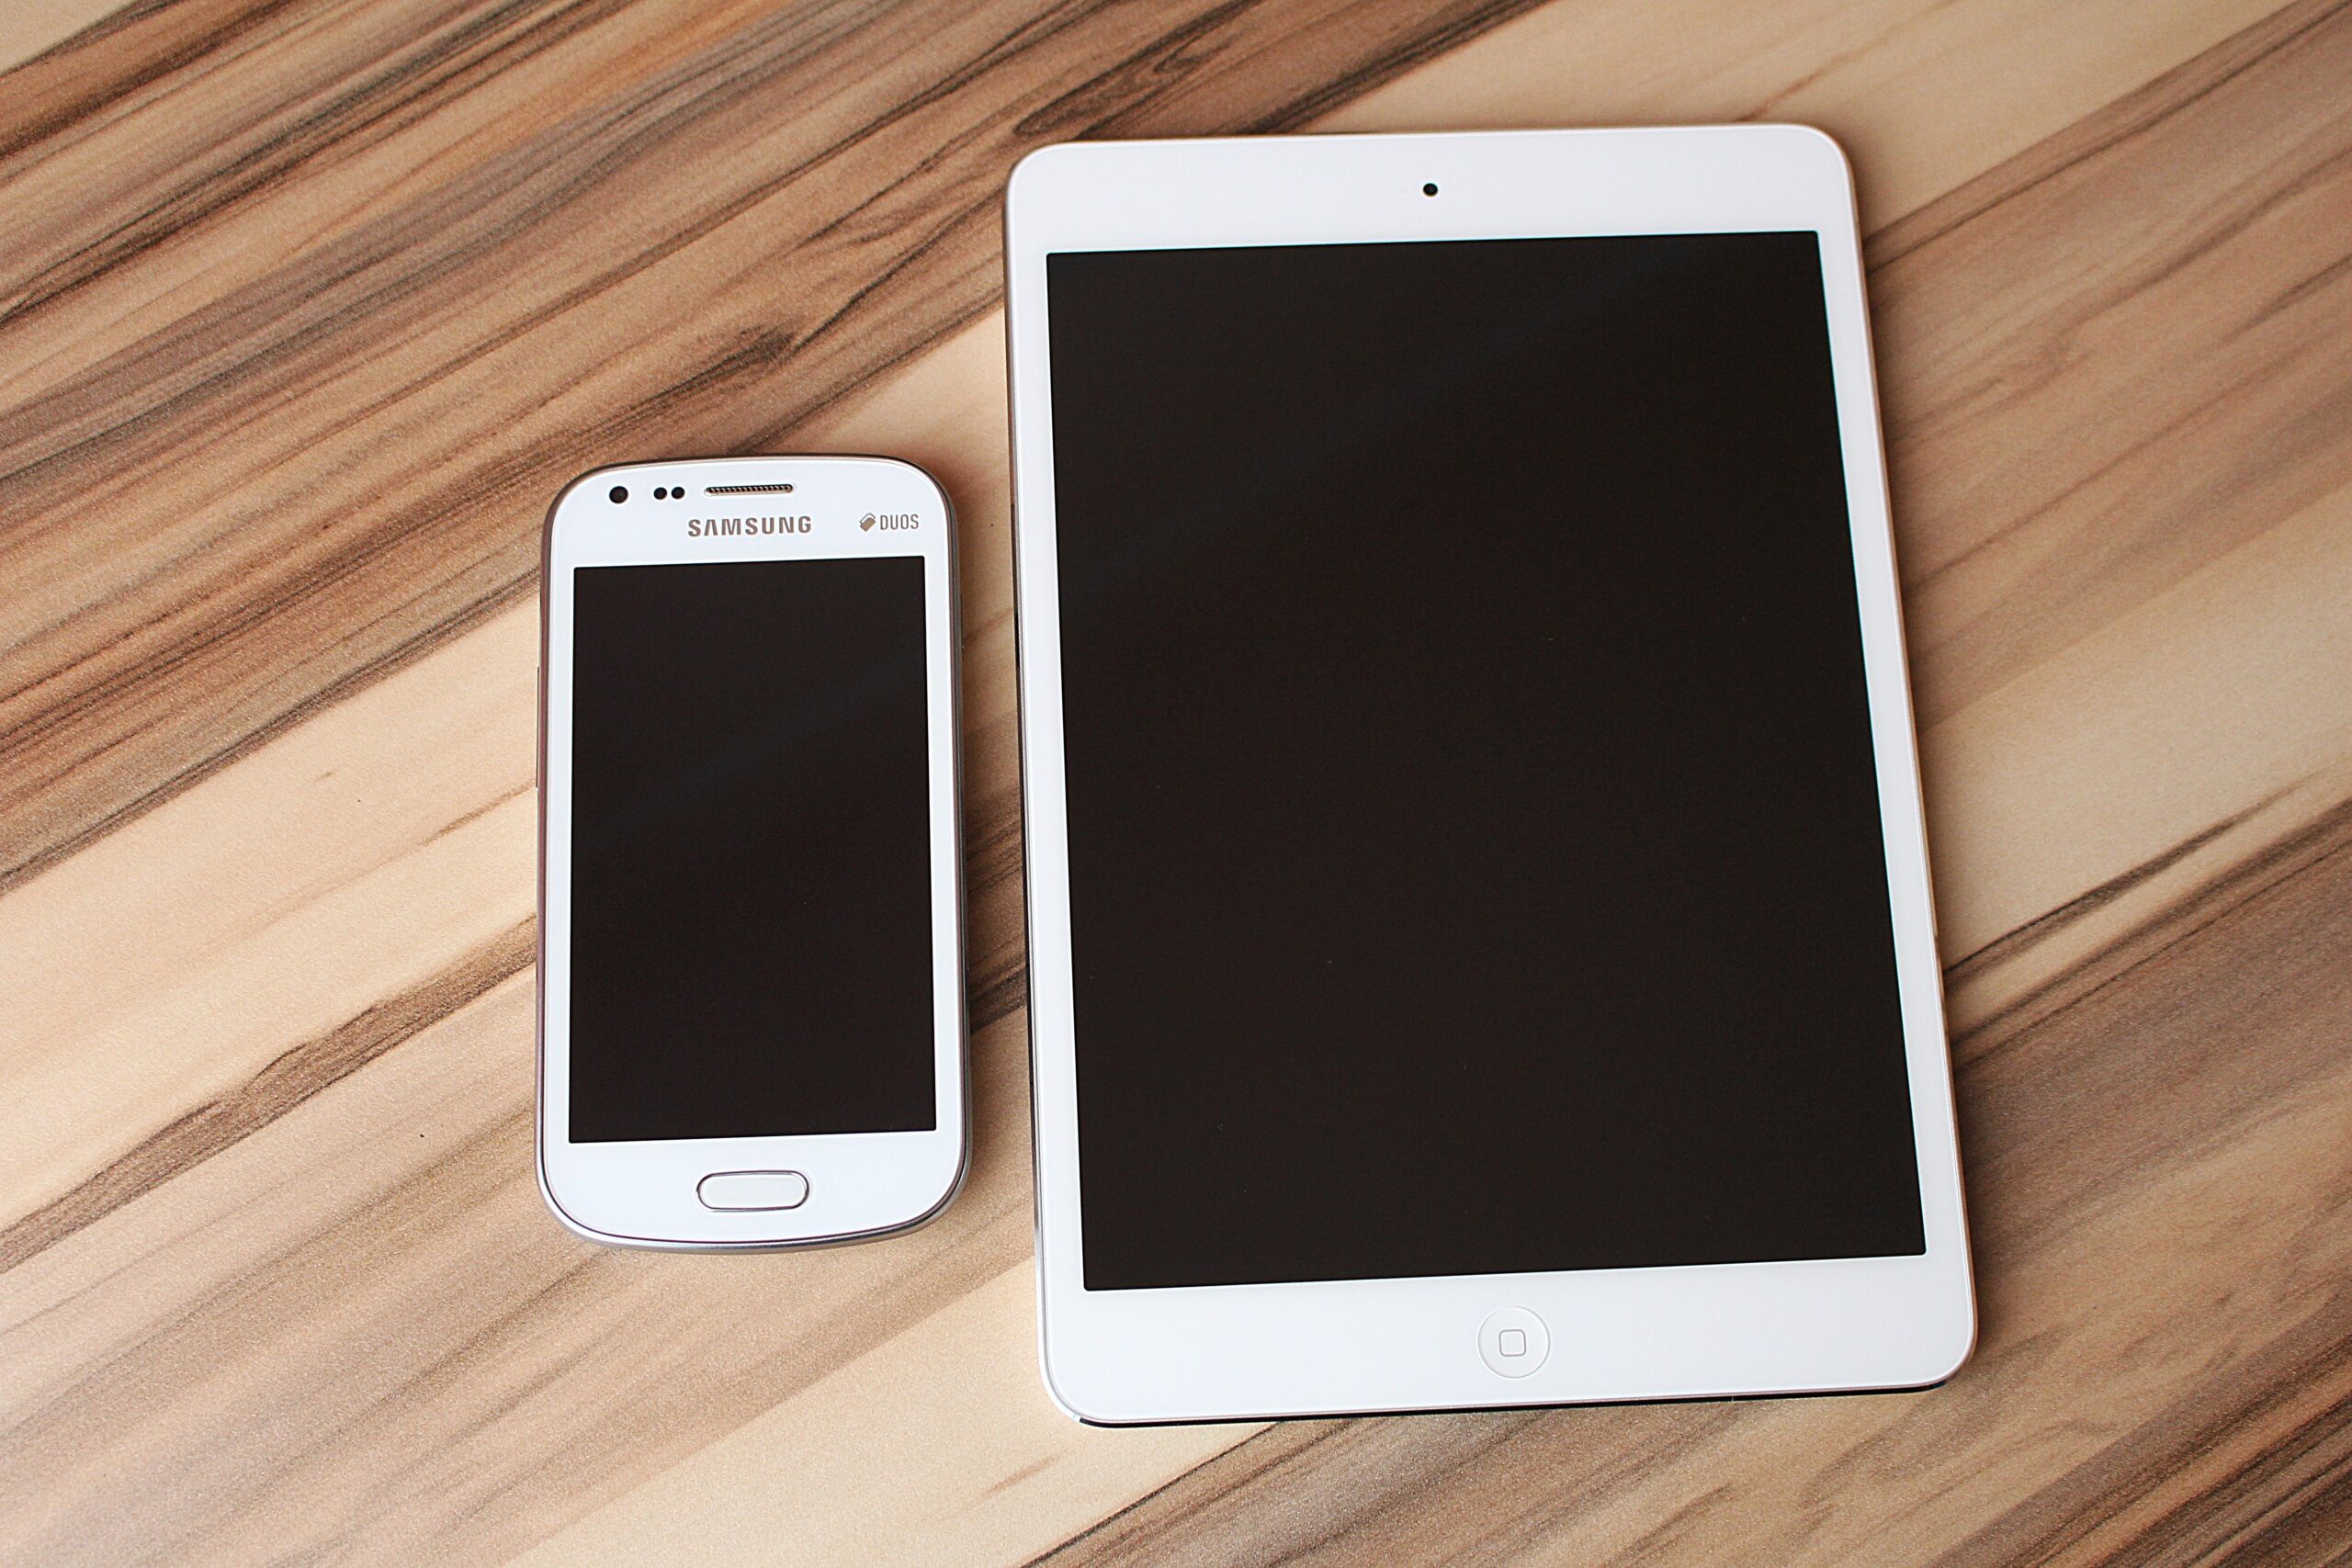 The difference between the size of a smartphone and a tablet